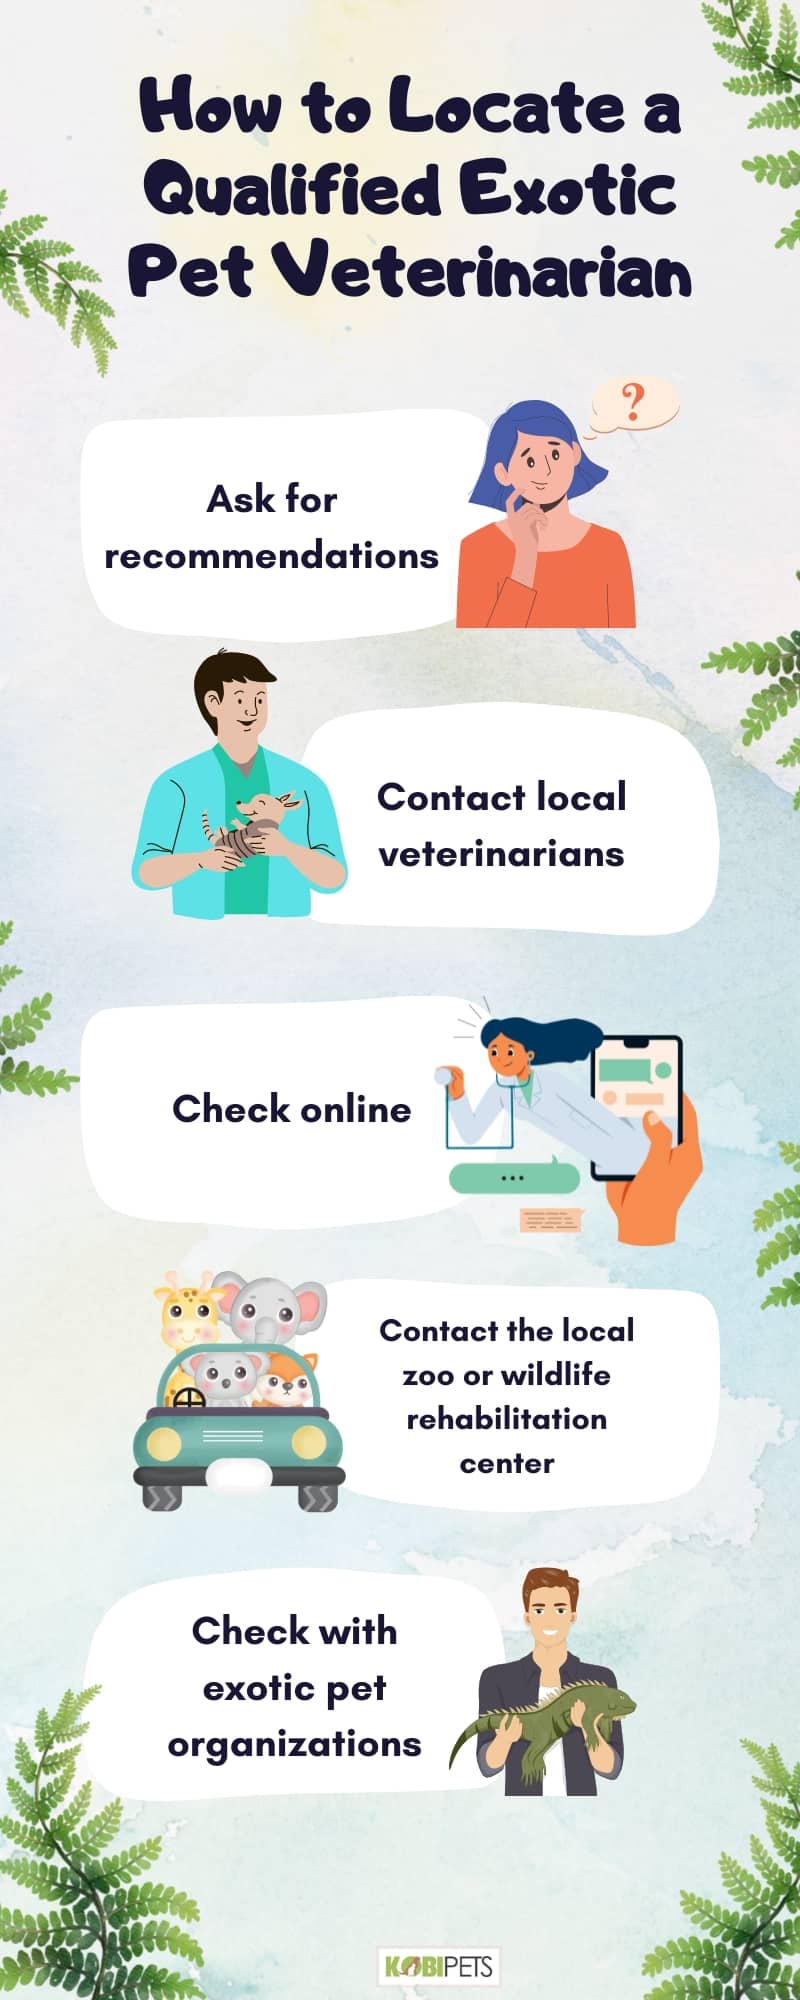 How to Locate a Qualified Exotic Pet Veterinarian